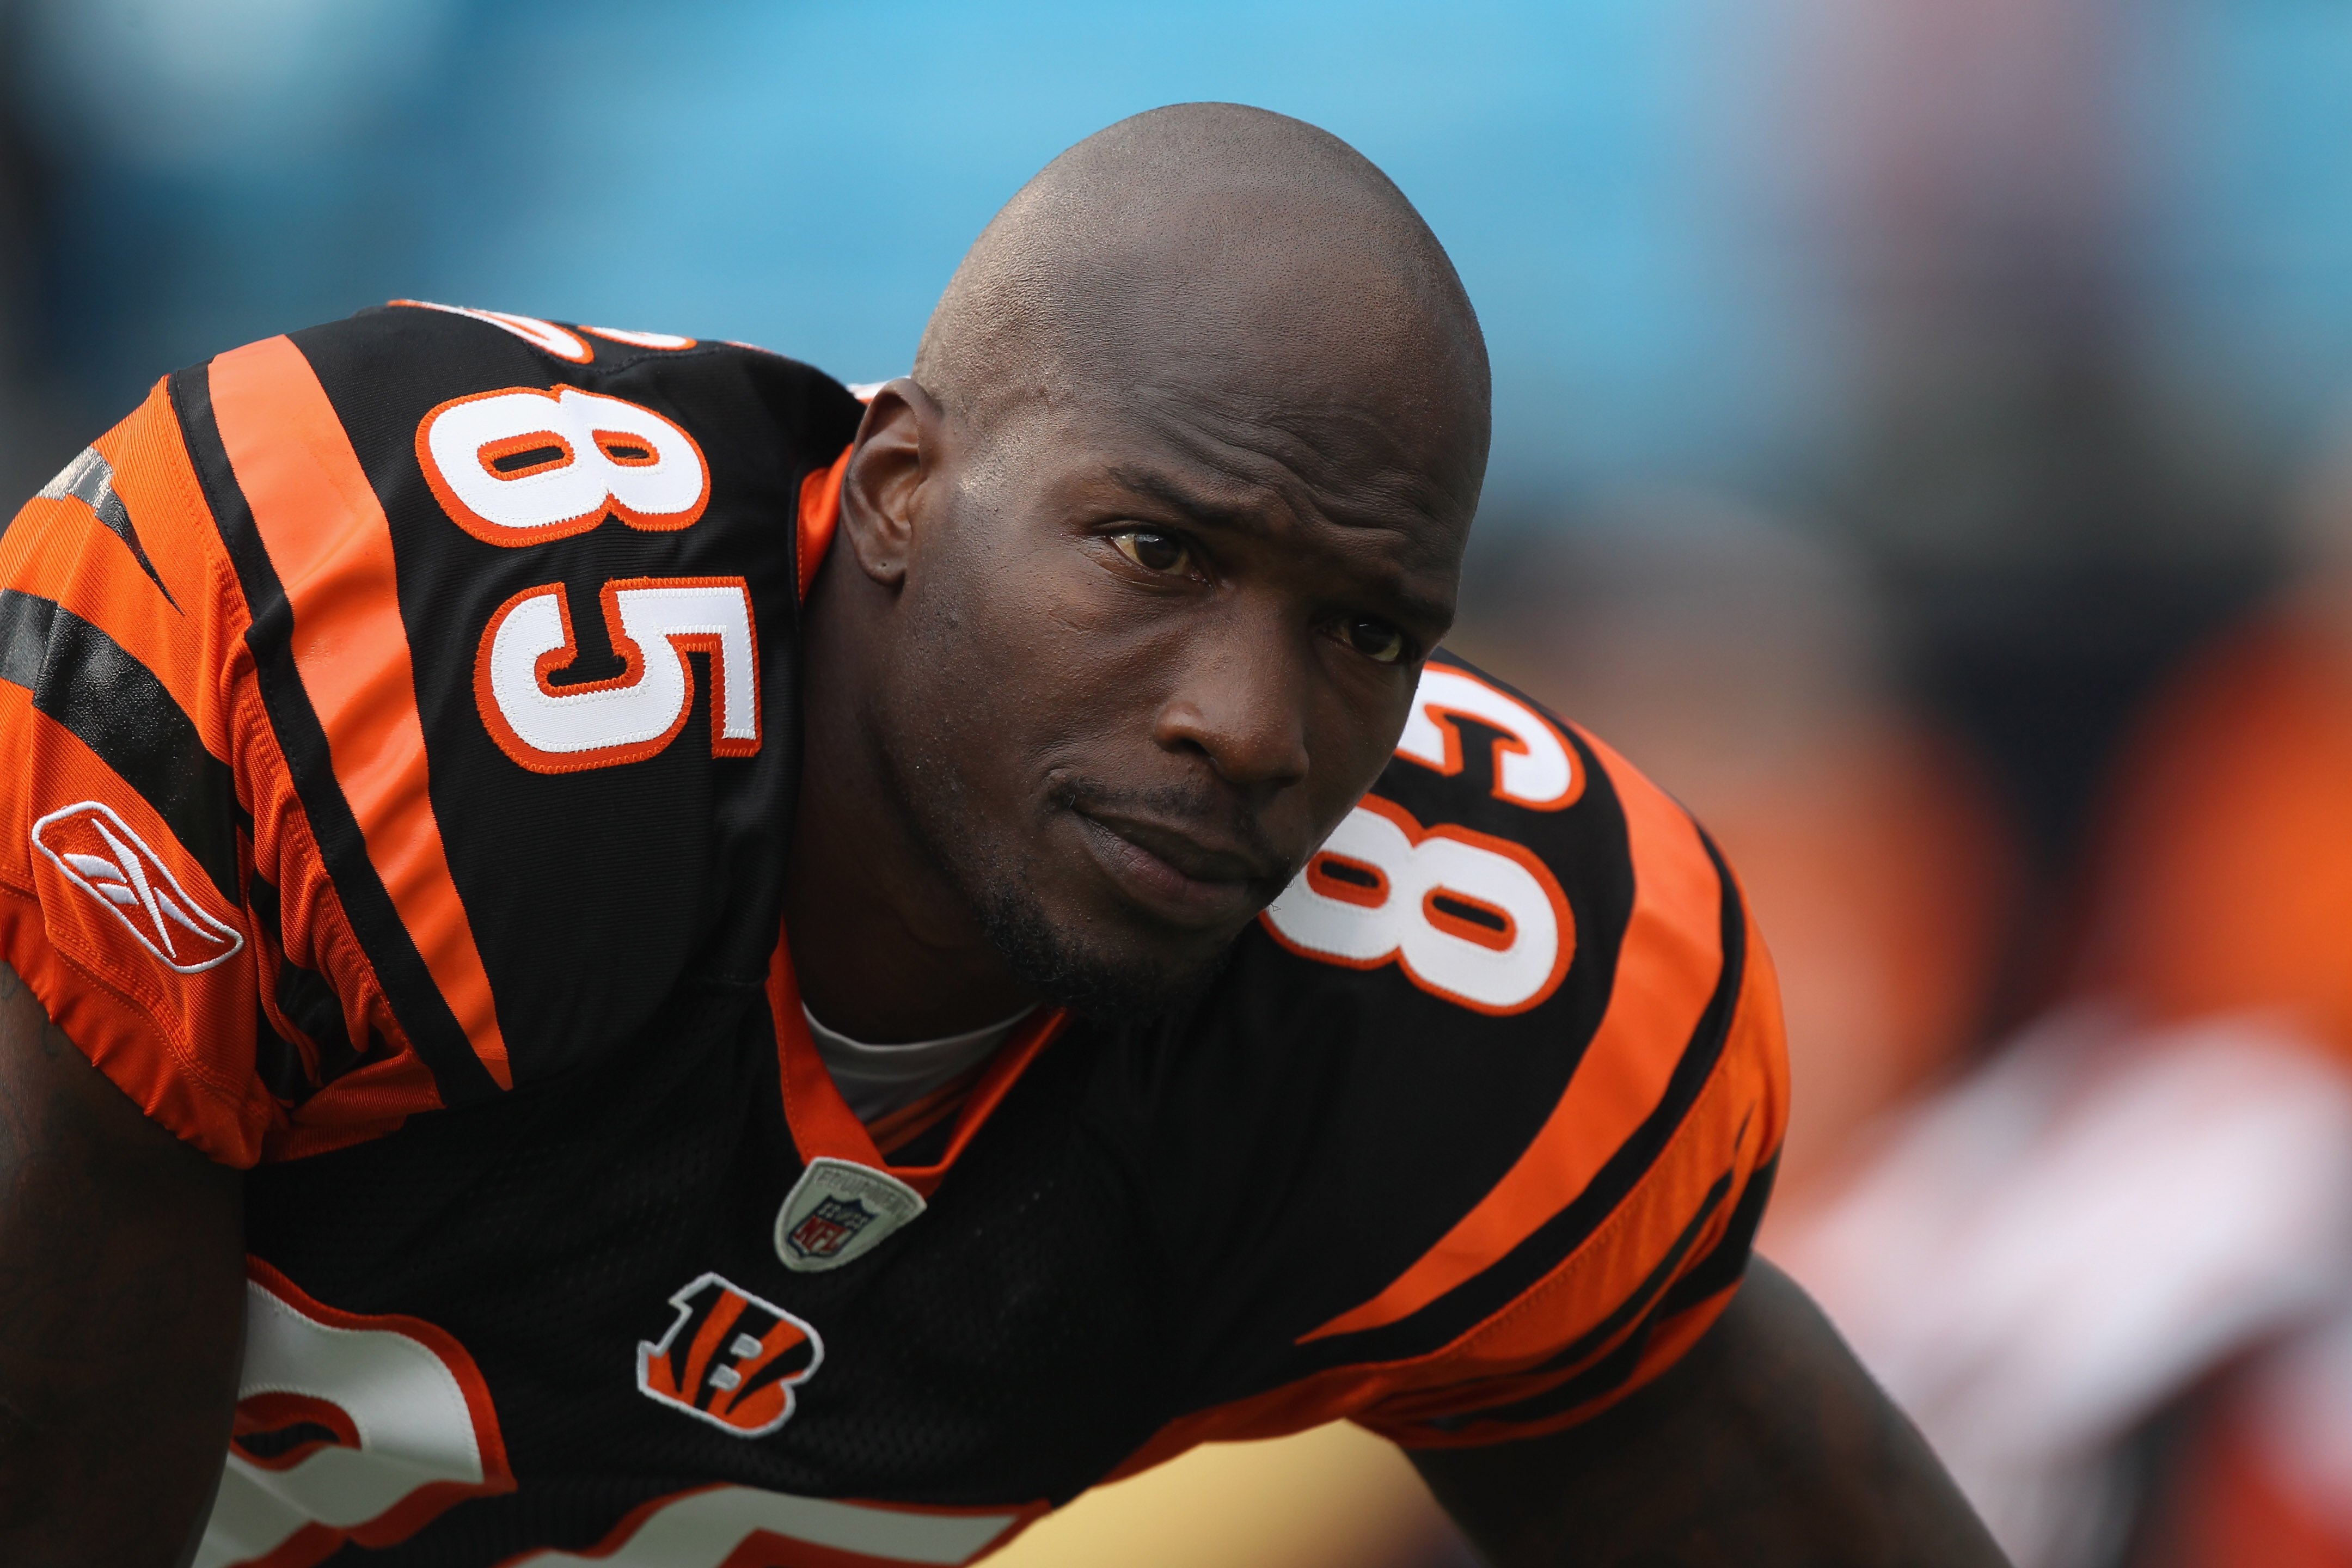 CHARLOTTE, NC - SEPTEMBER 26:  Chad Ochocinco #85 of the Cincinnati Bengals during their game against the Carolina Panthers at Bank of America Stadium on September 26, 2010 in Charlotte, North Carolina.  (Photo by Streeter Lecka/Getty Images)